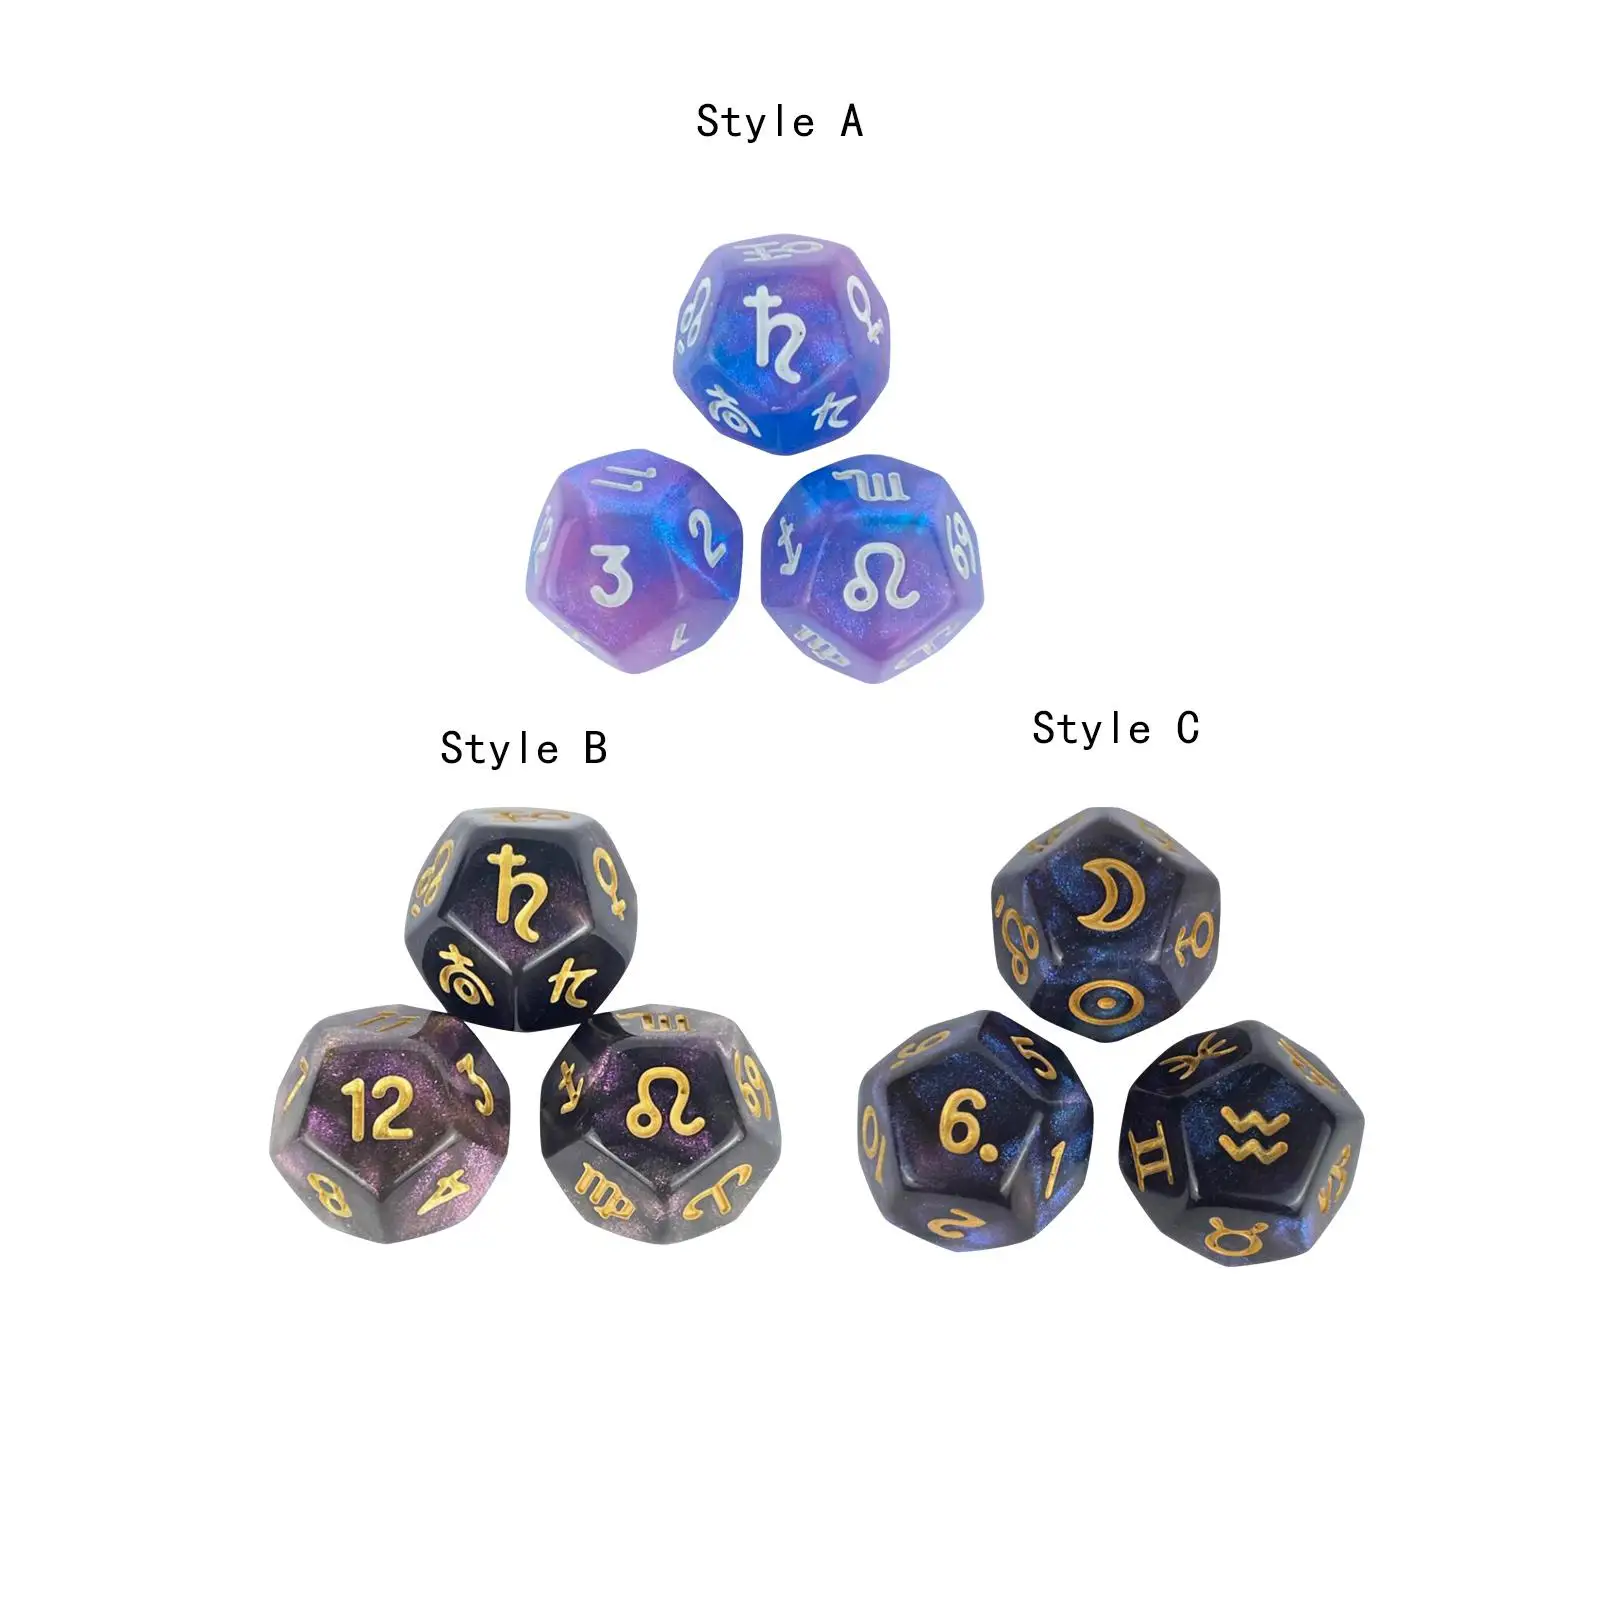 3x Tarot Cards Dice 12 Sided Polyhedral Dice Constellation Dice for Family Gathering Tarot Cards Accessory